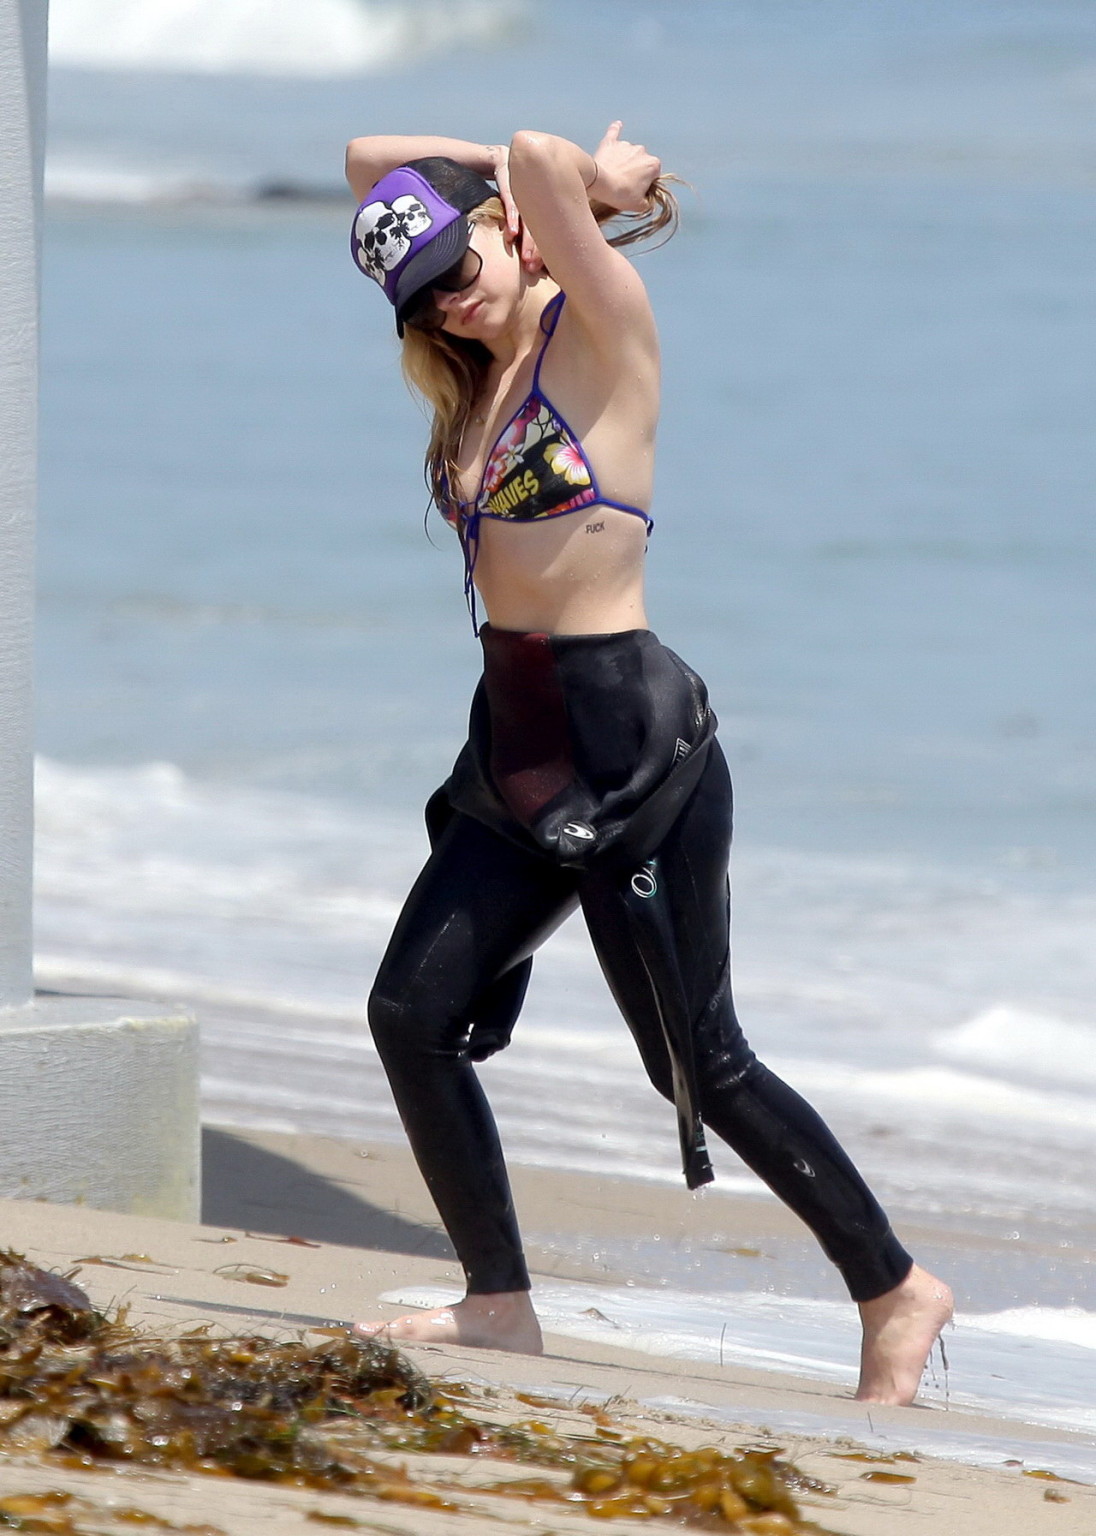 Avril Lavigne wearing a bikini top and a wetsuit on the beach in Malibu #75342750